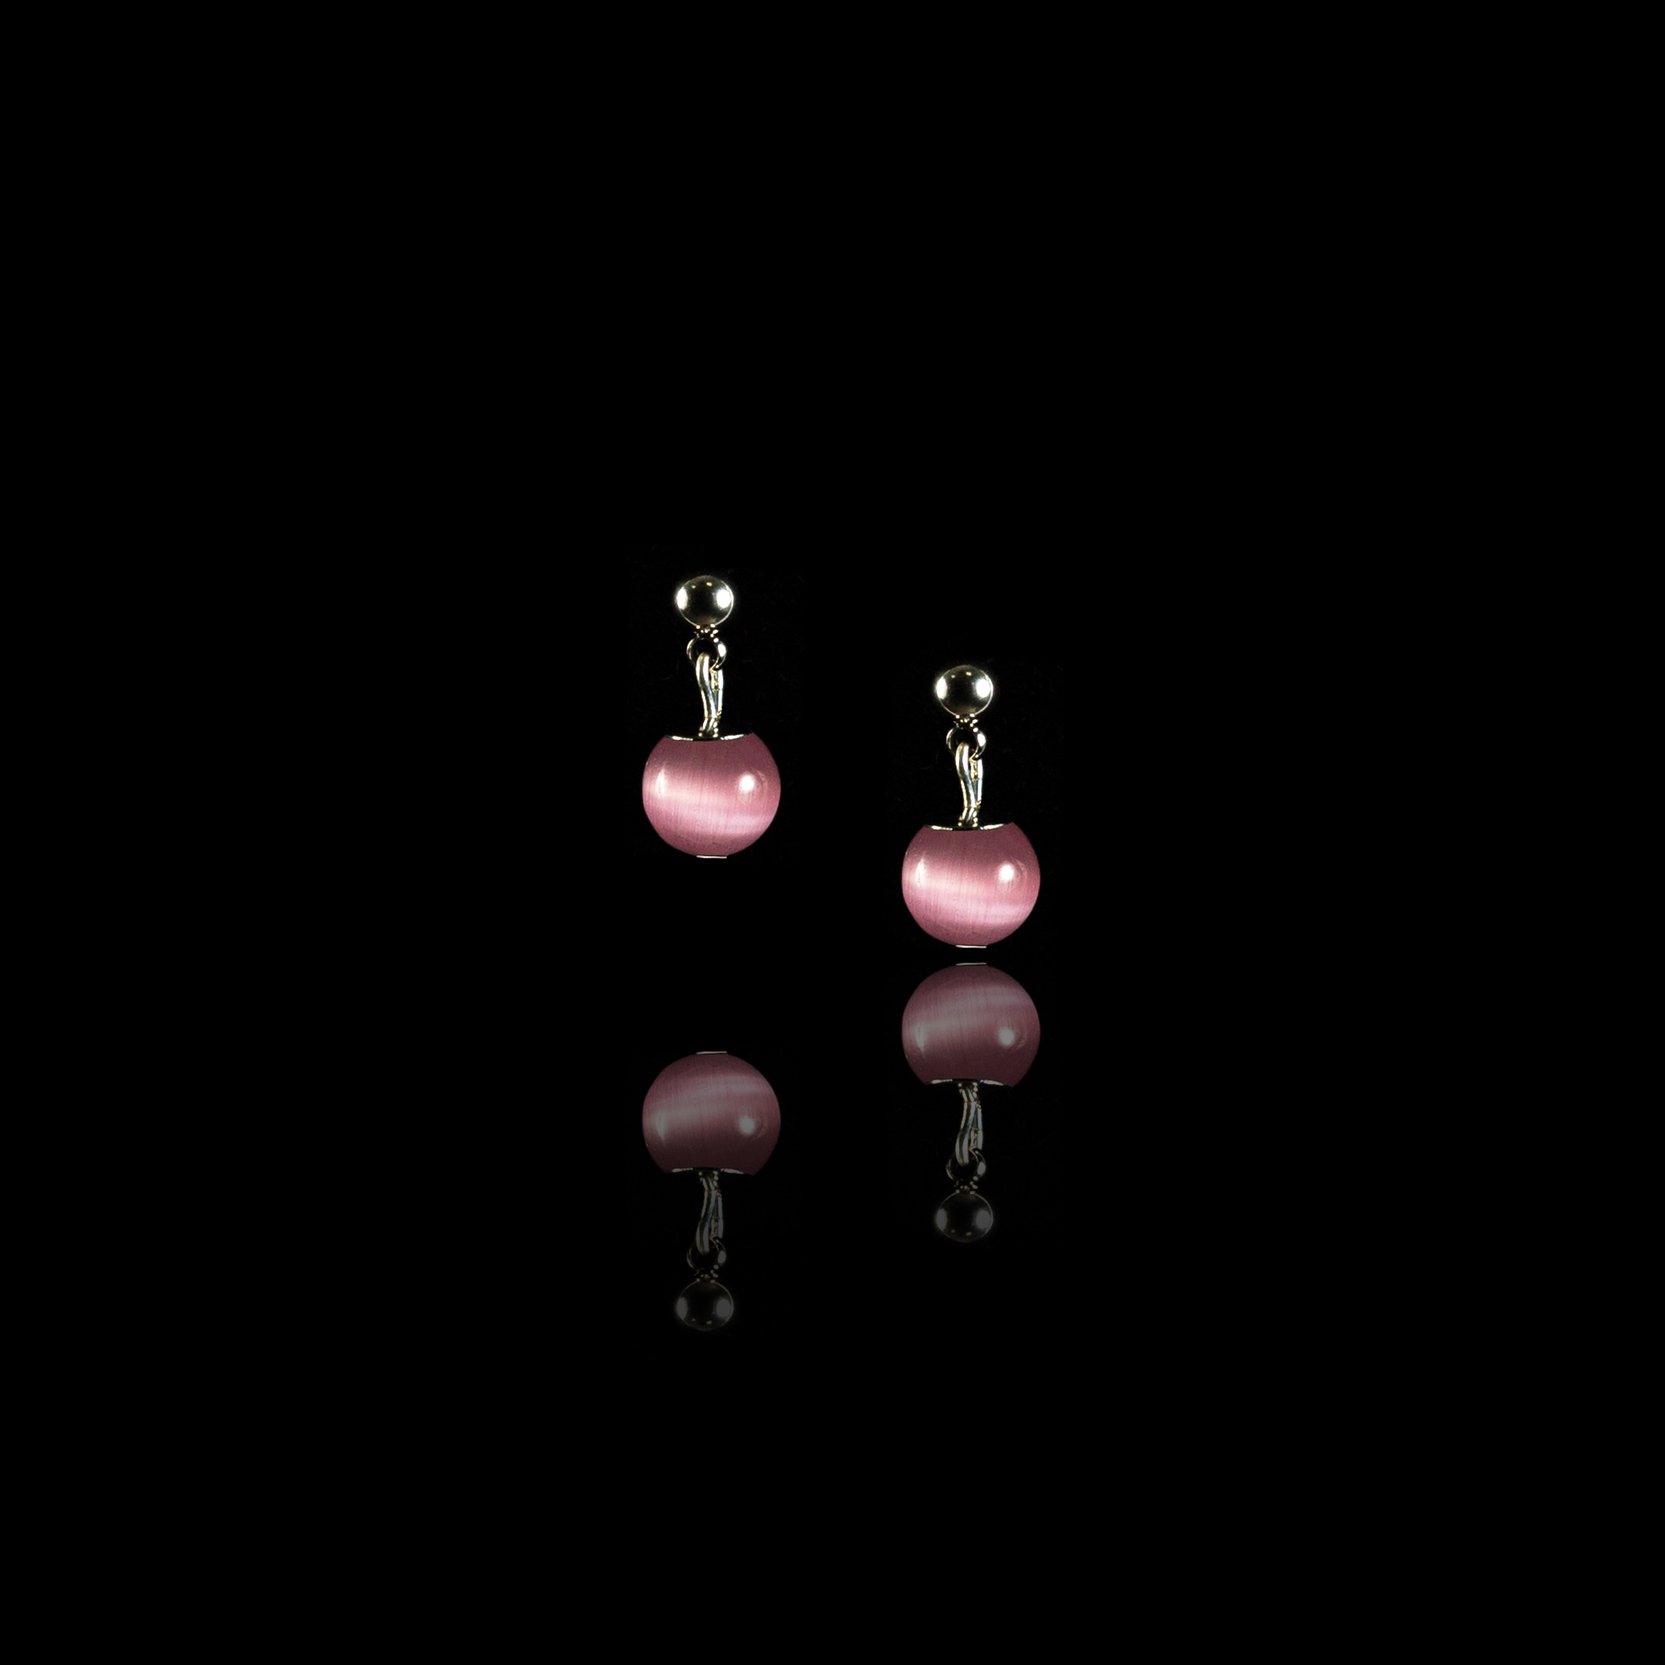 Small stud earrings with a pink stone.